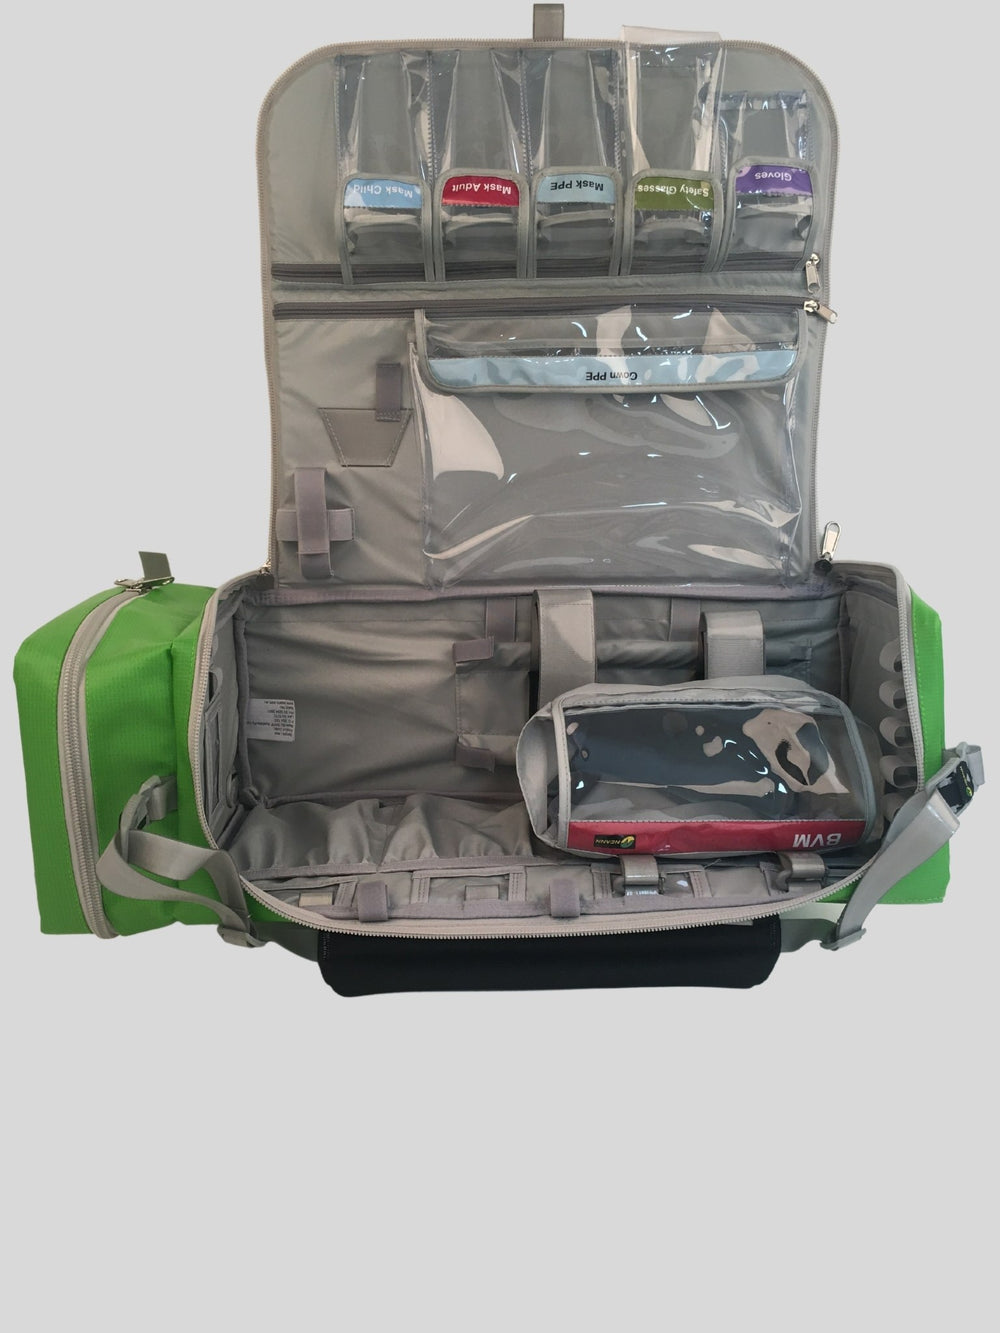 Neann OxyresQ + Soft Pack Oxy  Bag Only - Green